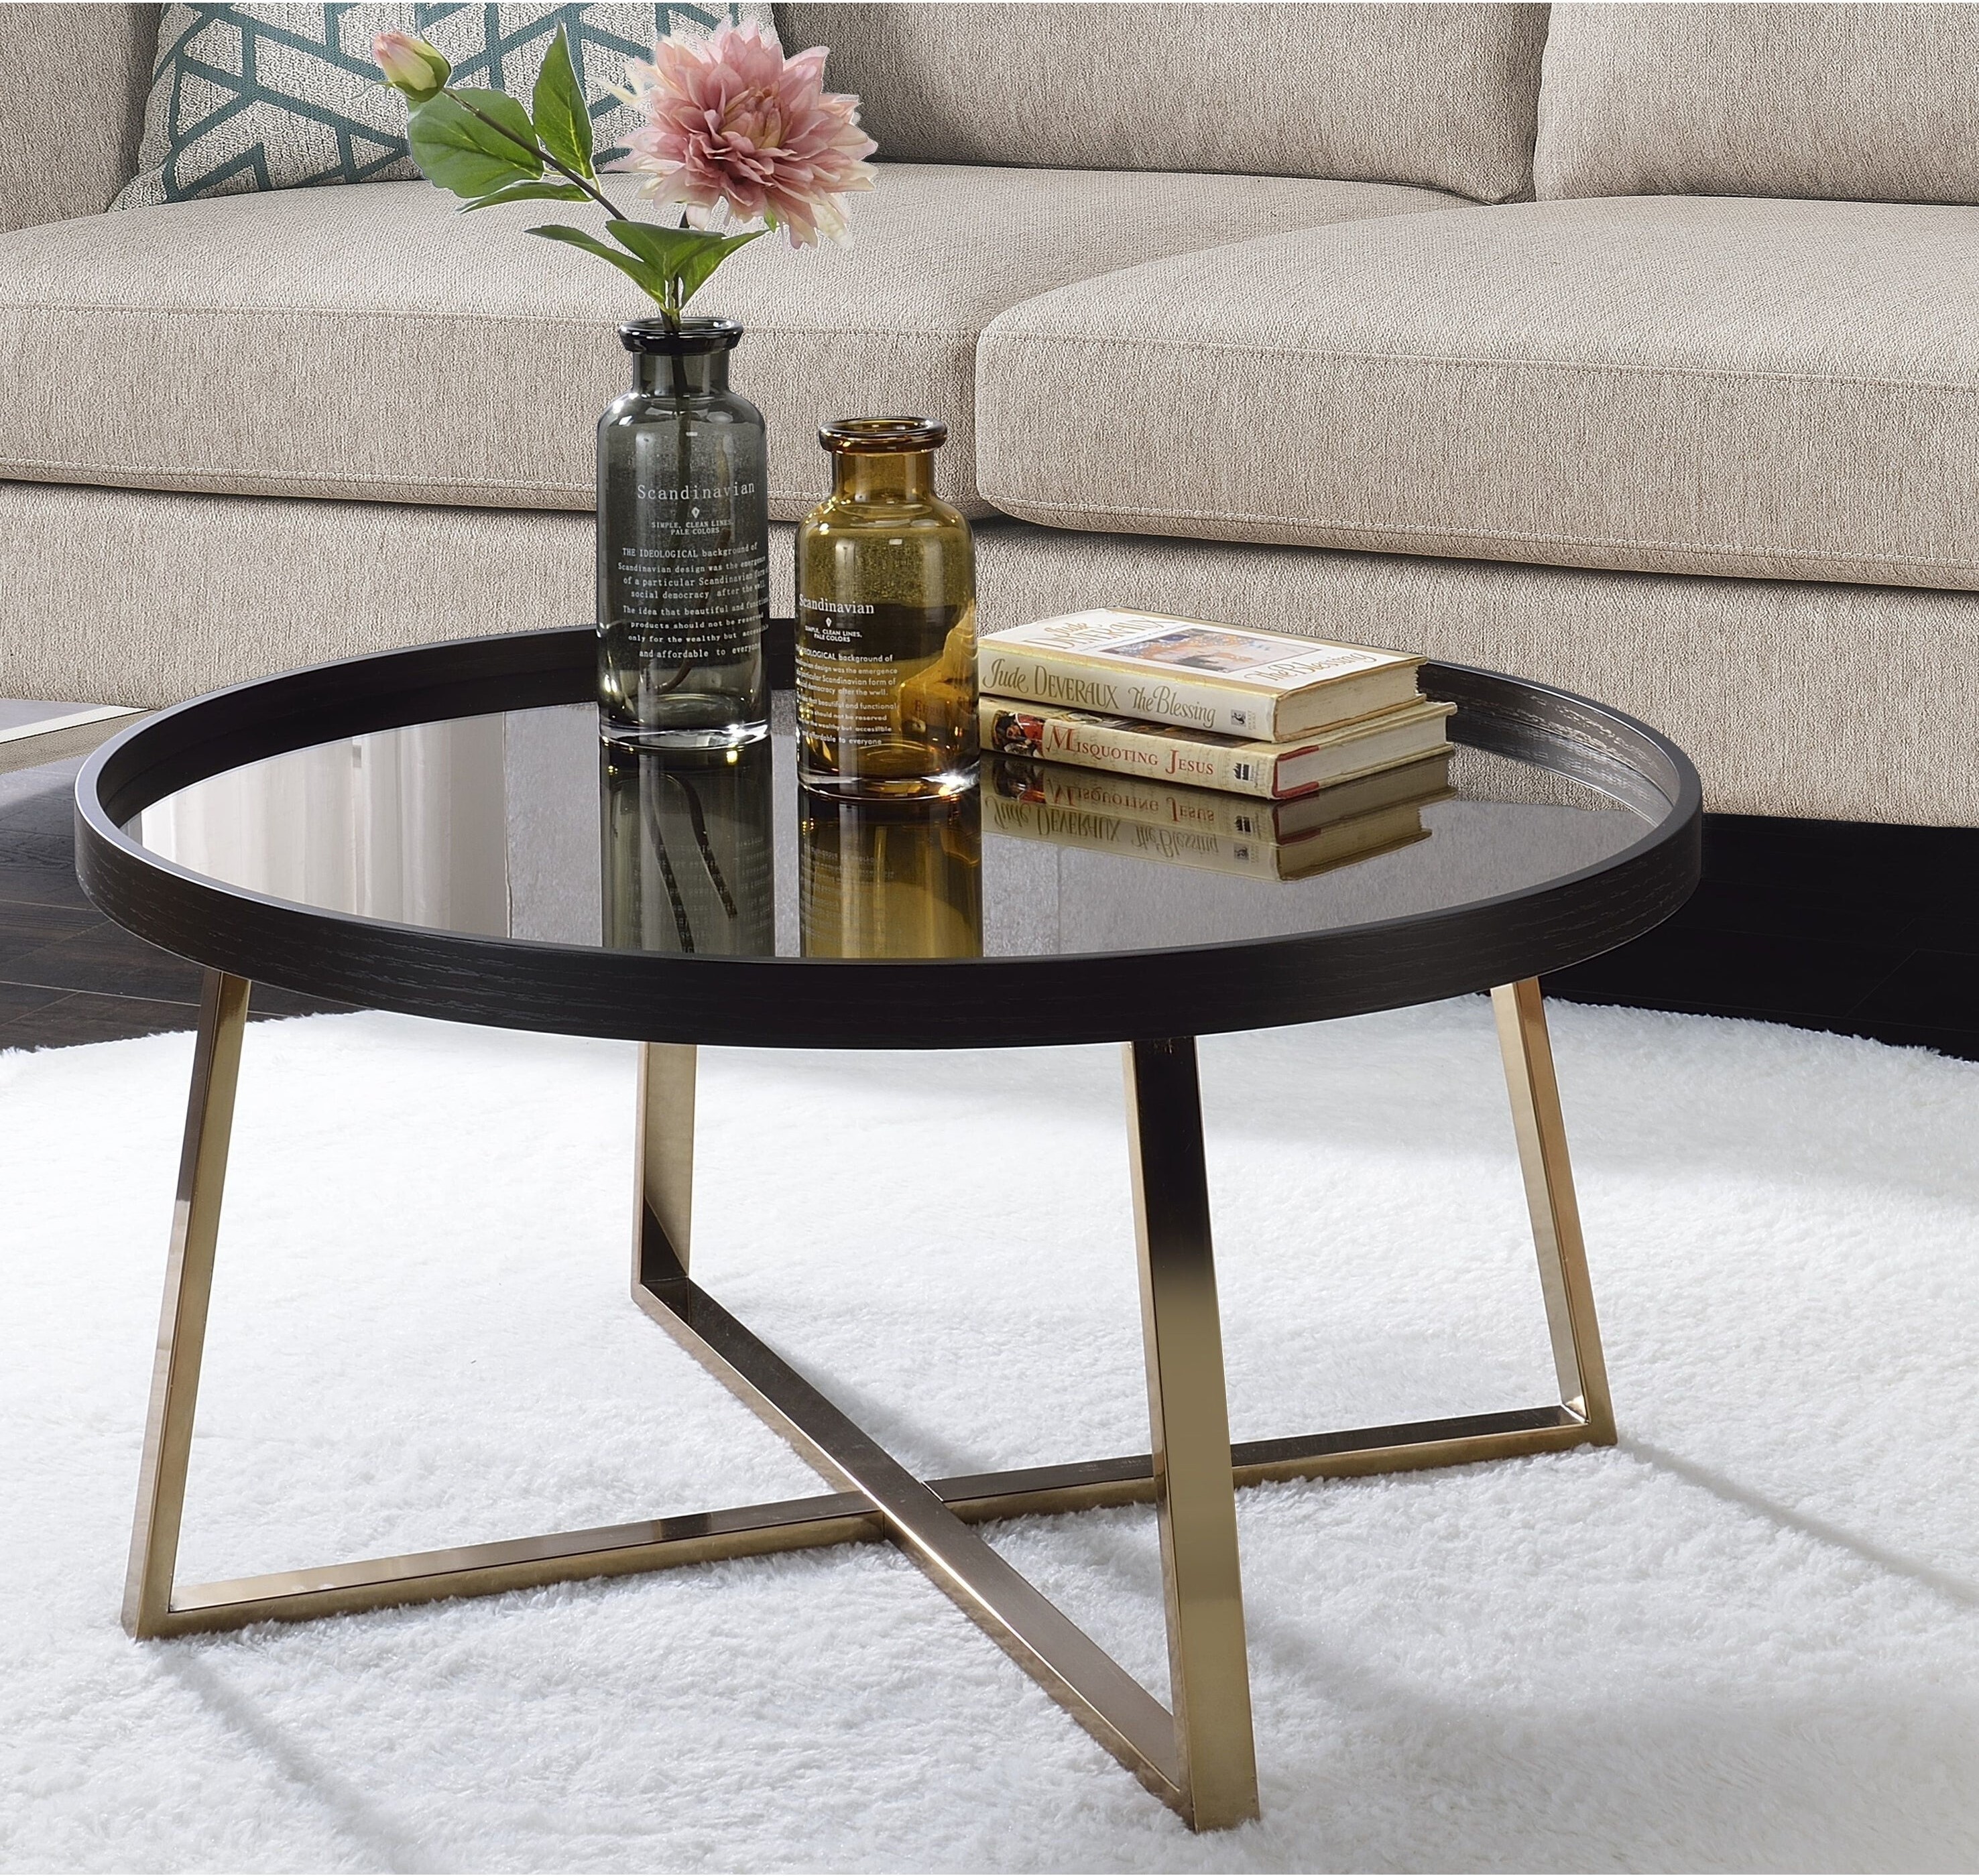 Mirrored Black Round Coffee Table